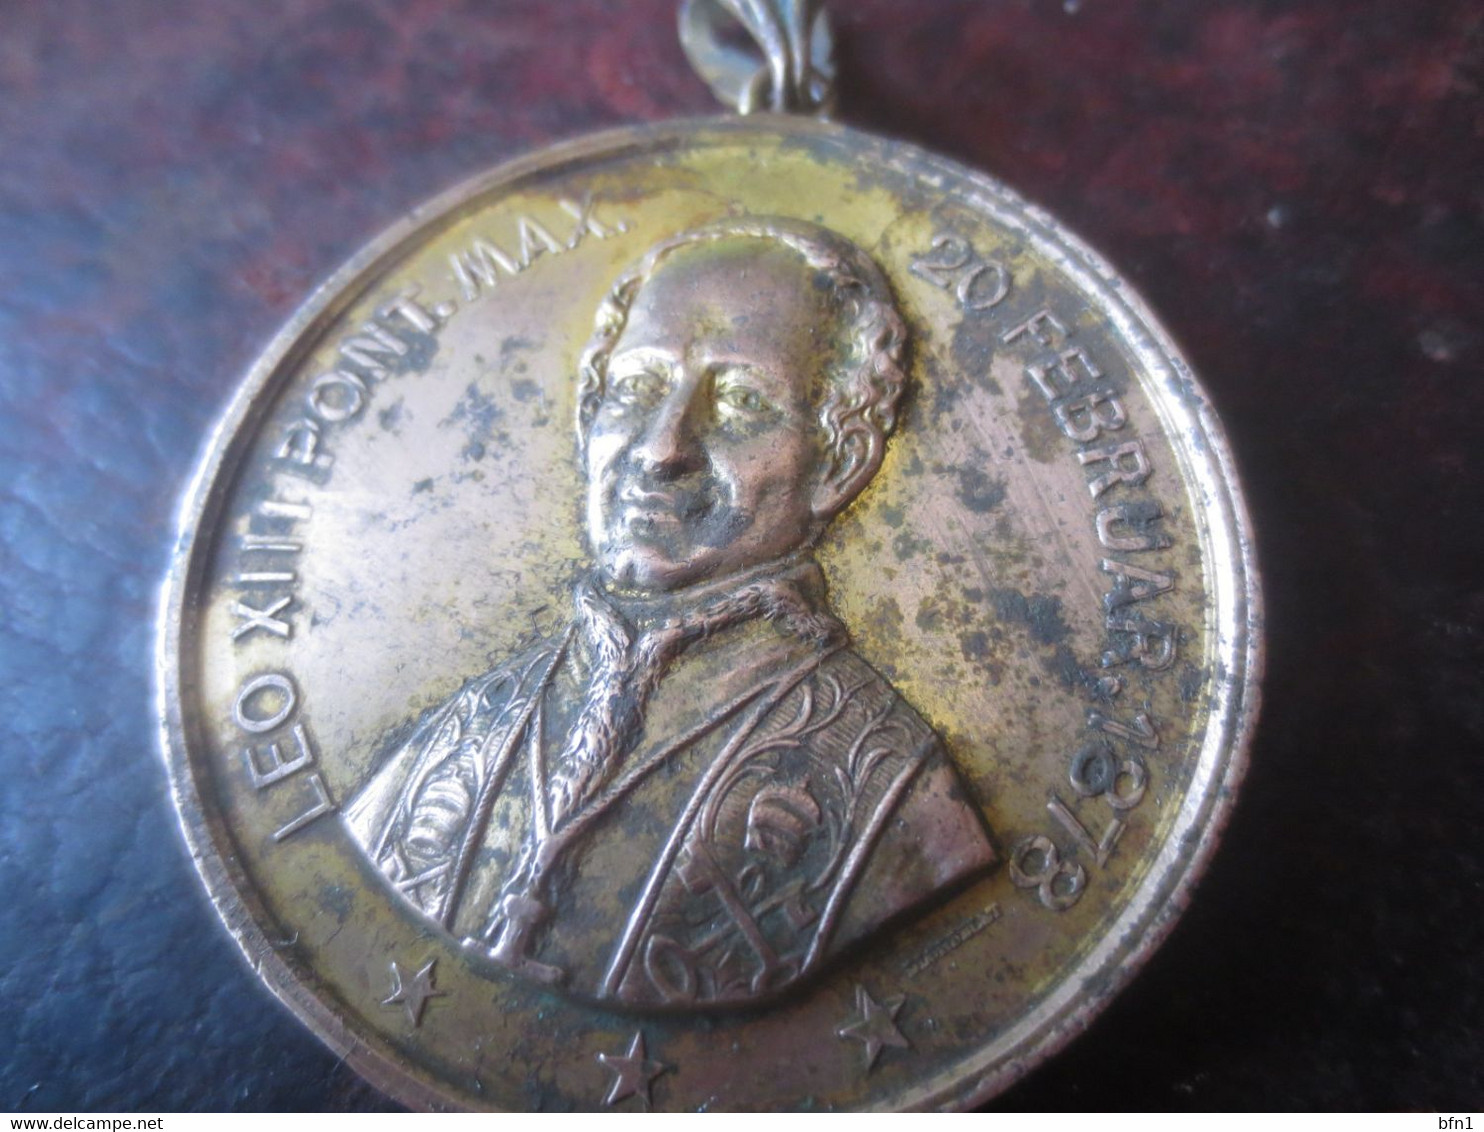 MEDAILLE PAPALE - PIE IX PAPE 1846-1878- LEO XIII PONT.MAX 1878 - A NETTOYER - Royal/Of Nobility